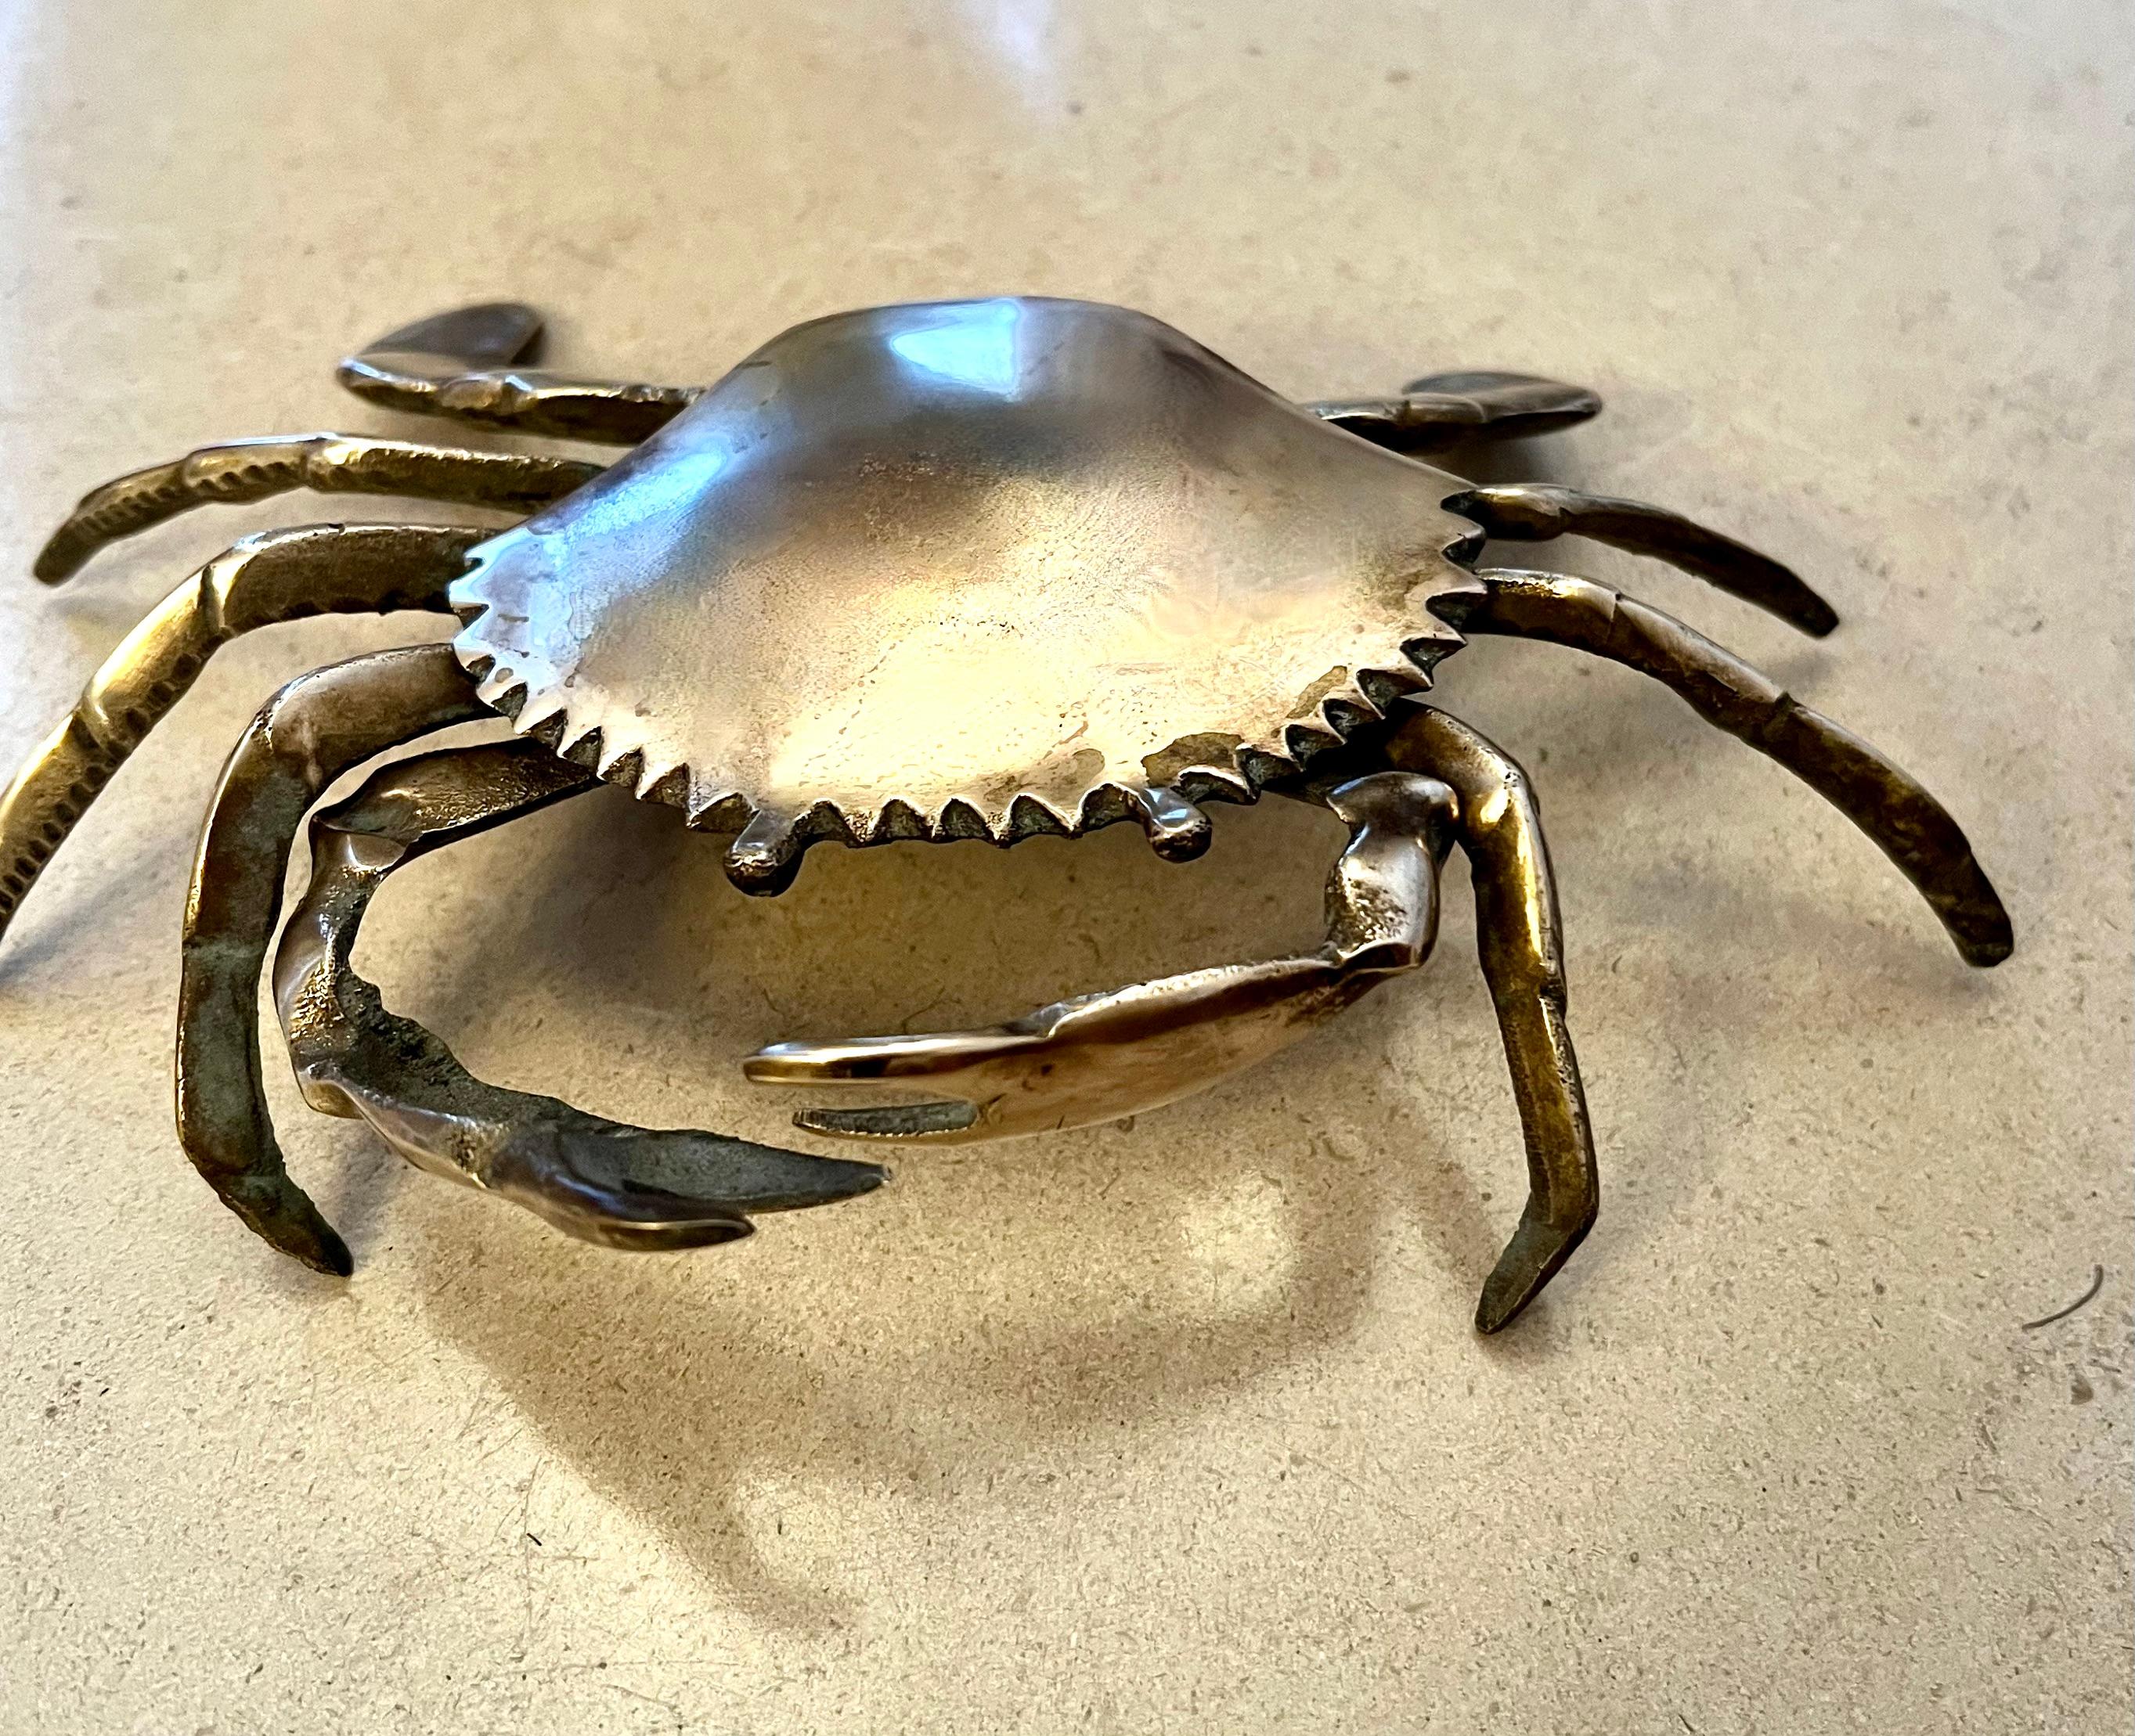 A small Cancer Crab that serves as a decorative item or for use as an ashtray or 420 tray. The brass is patinated but can be shined to a brilliant gold.

A compliment to many spaces and especially those by the water or Cancers! We have two this